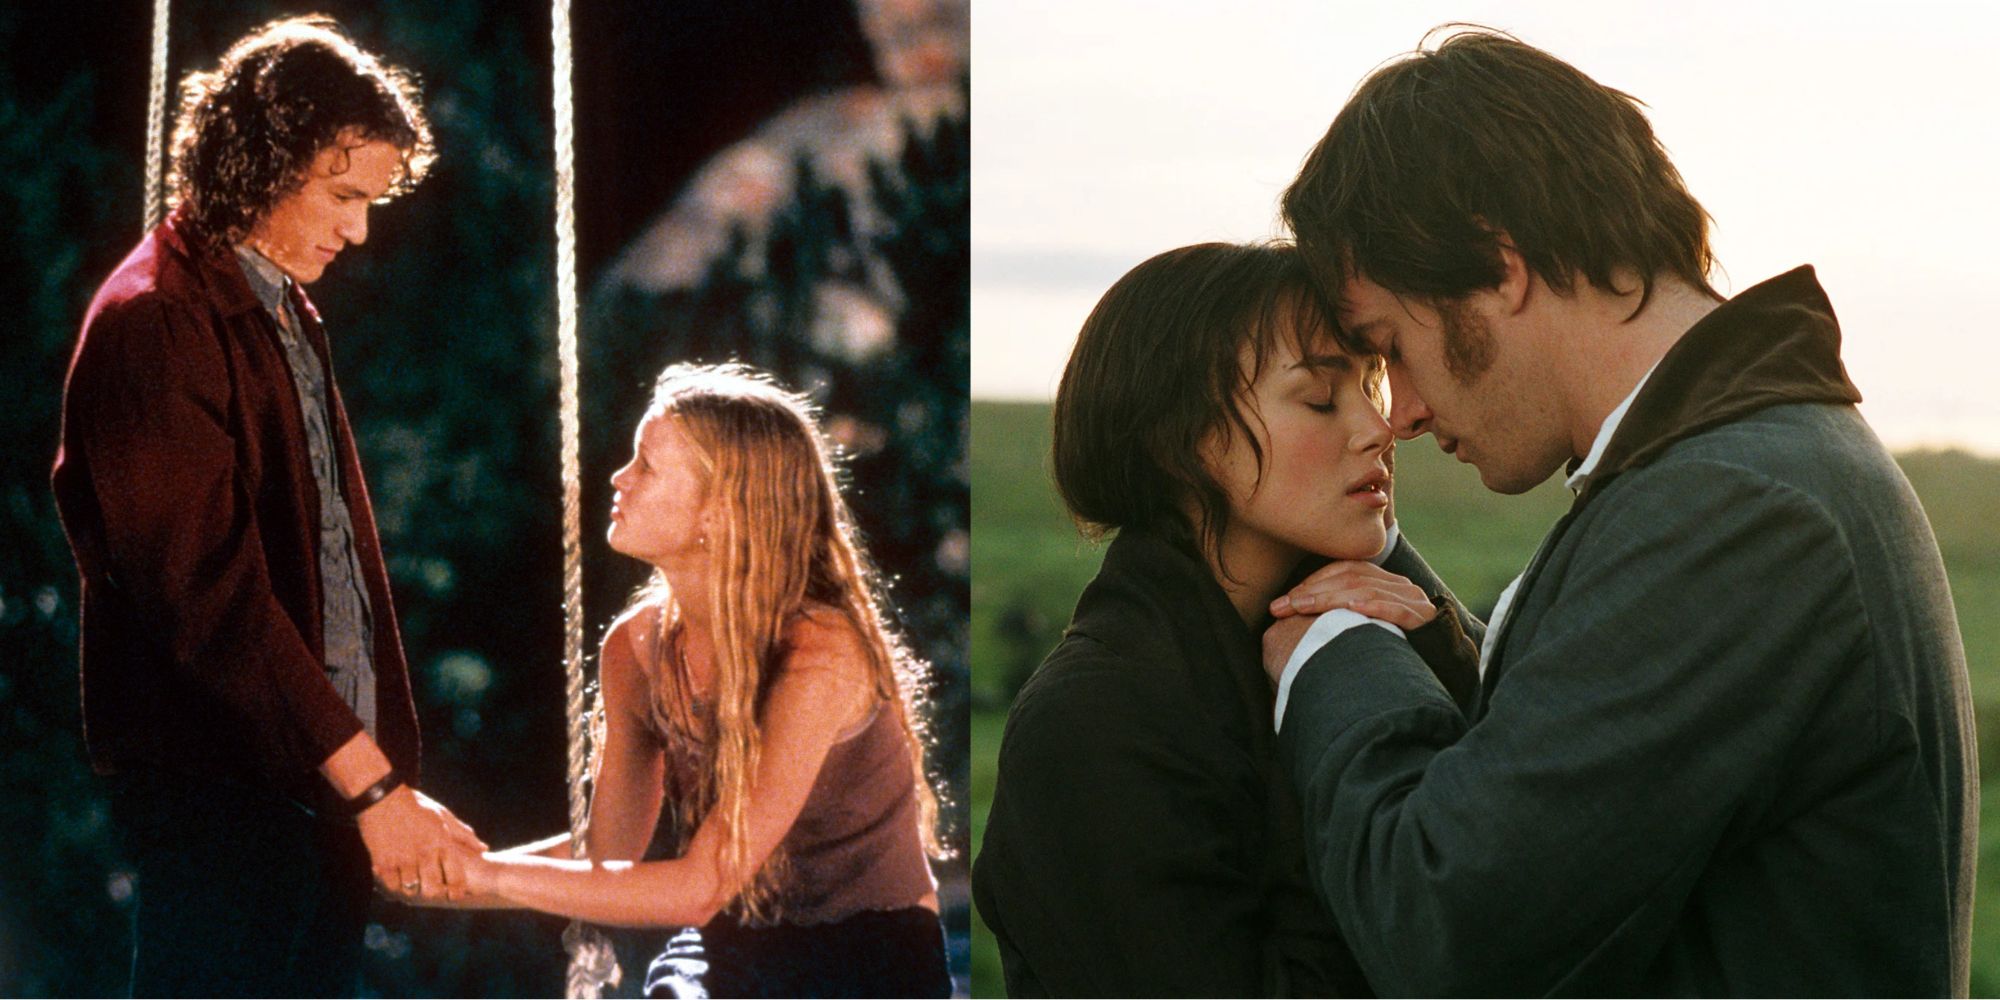 10 things I Hate about You and Pride & Prejudice